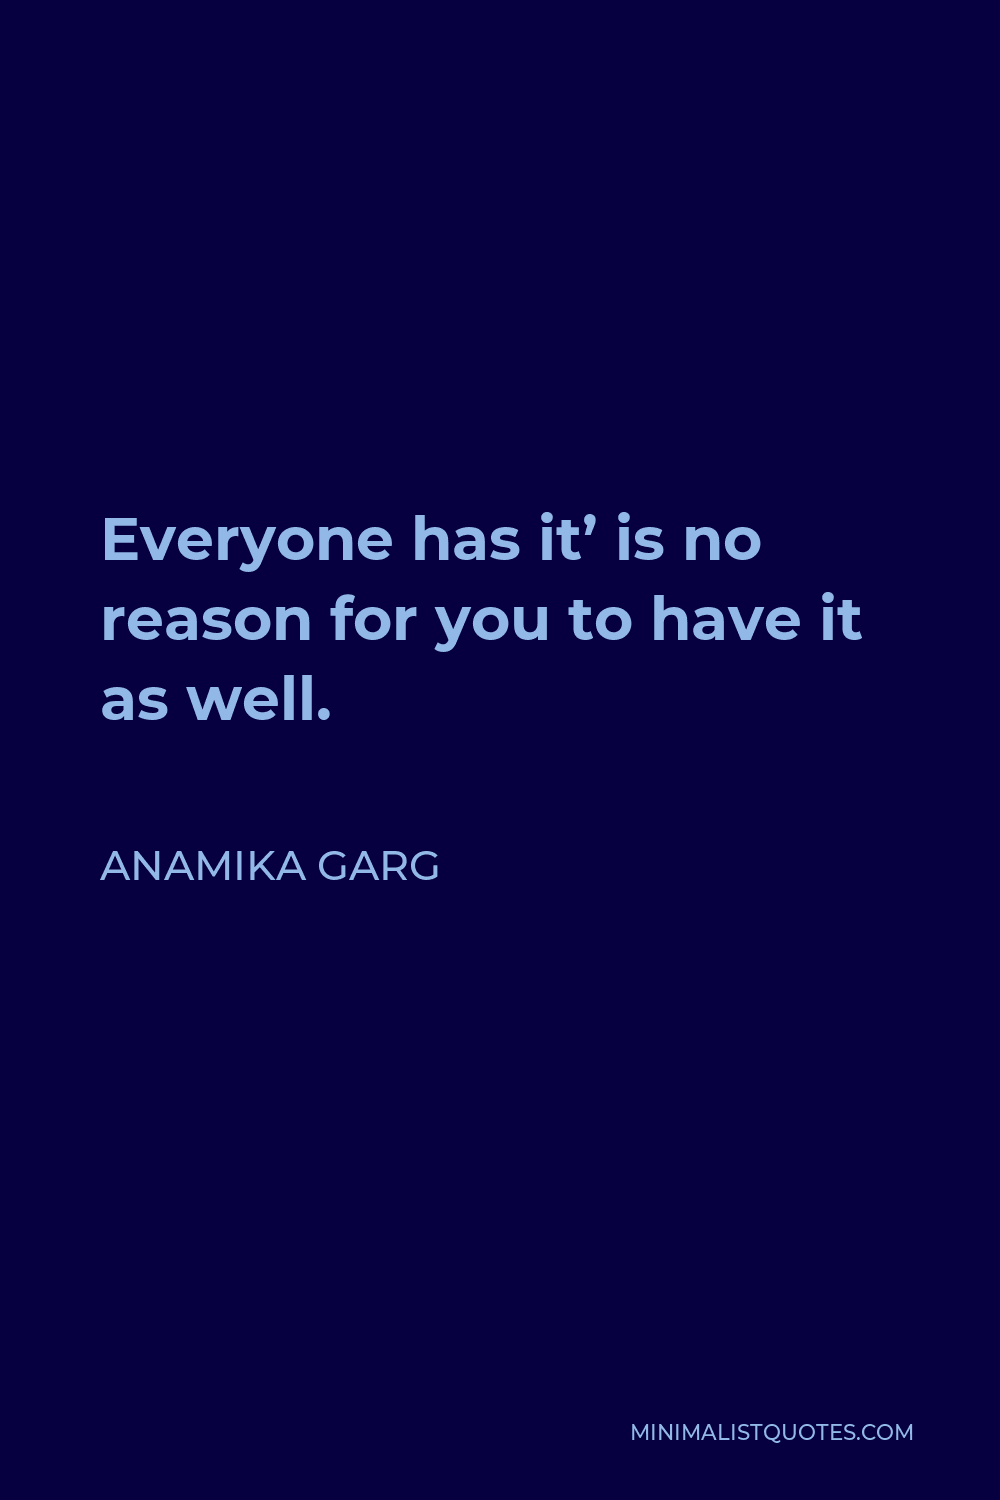 Anamika Garg Quote - Everyone has it’ is no reason for you to have it as well.